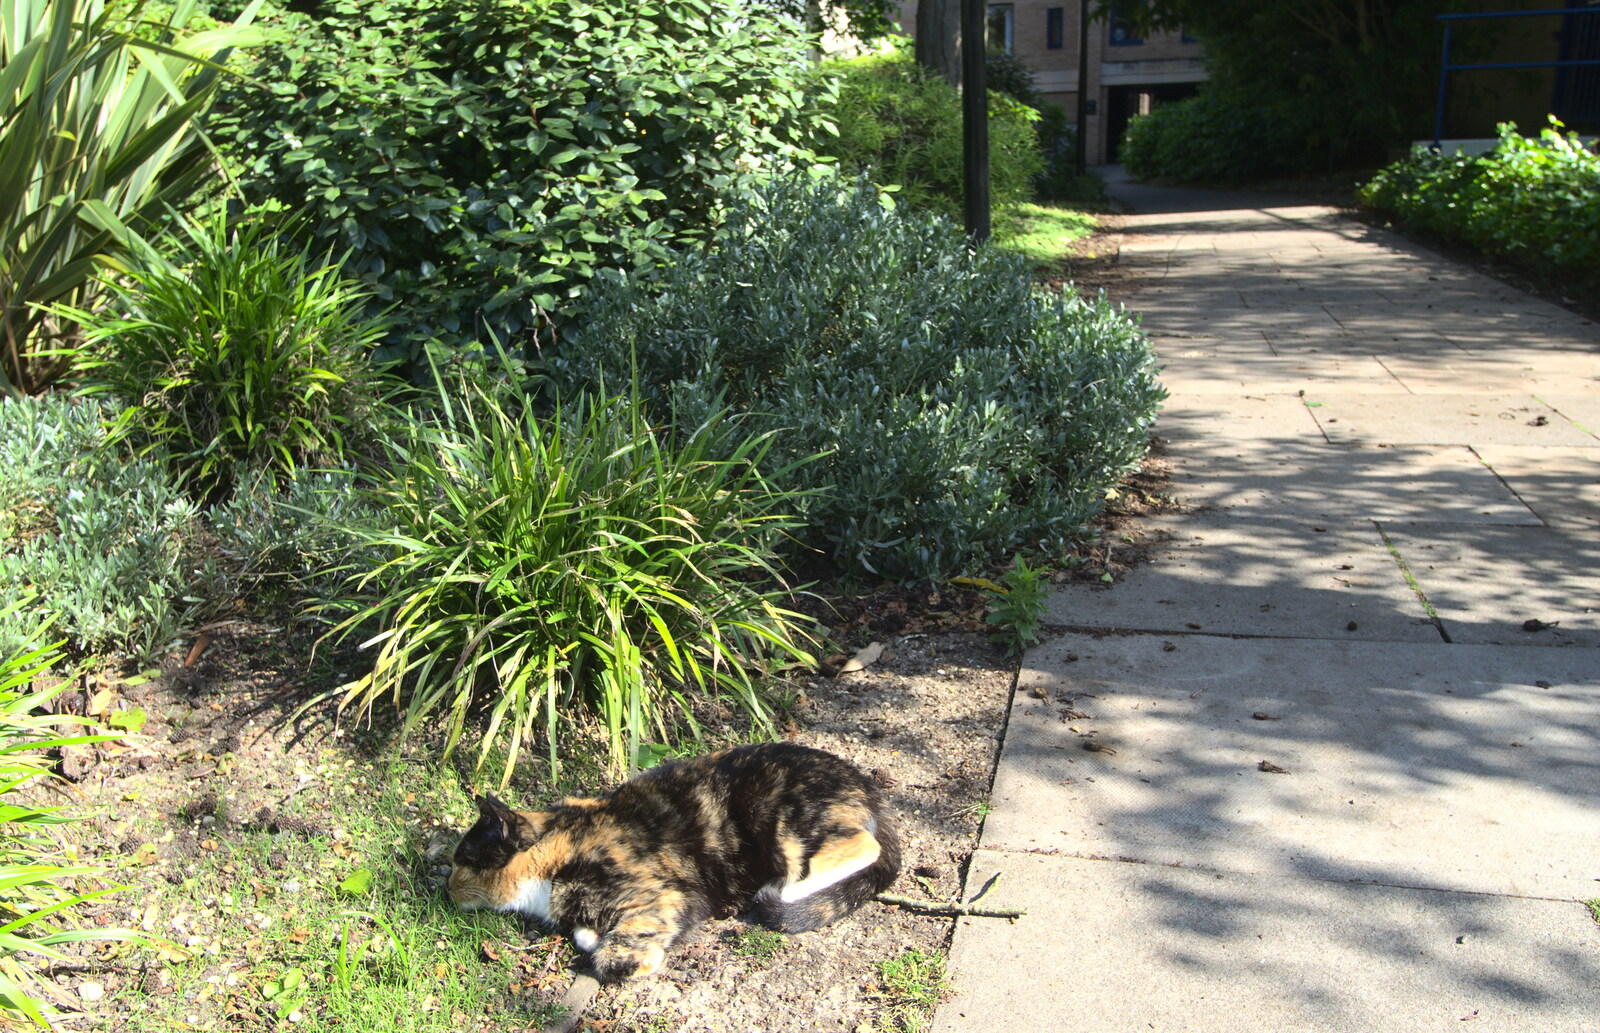 Back in the 'Bridge: an Anniversary, Cambridge - 3rd July 2016: A tortoiseshell cat finds a sunny spot